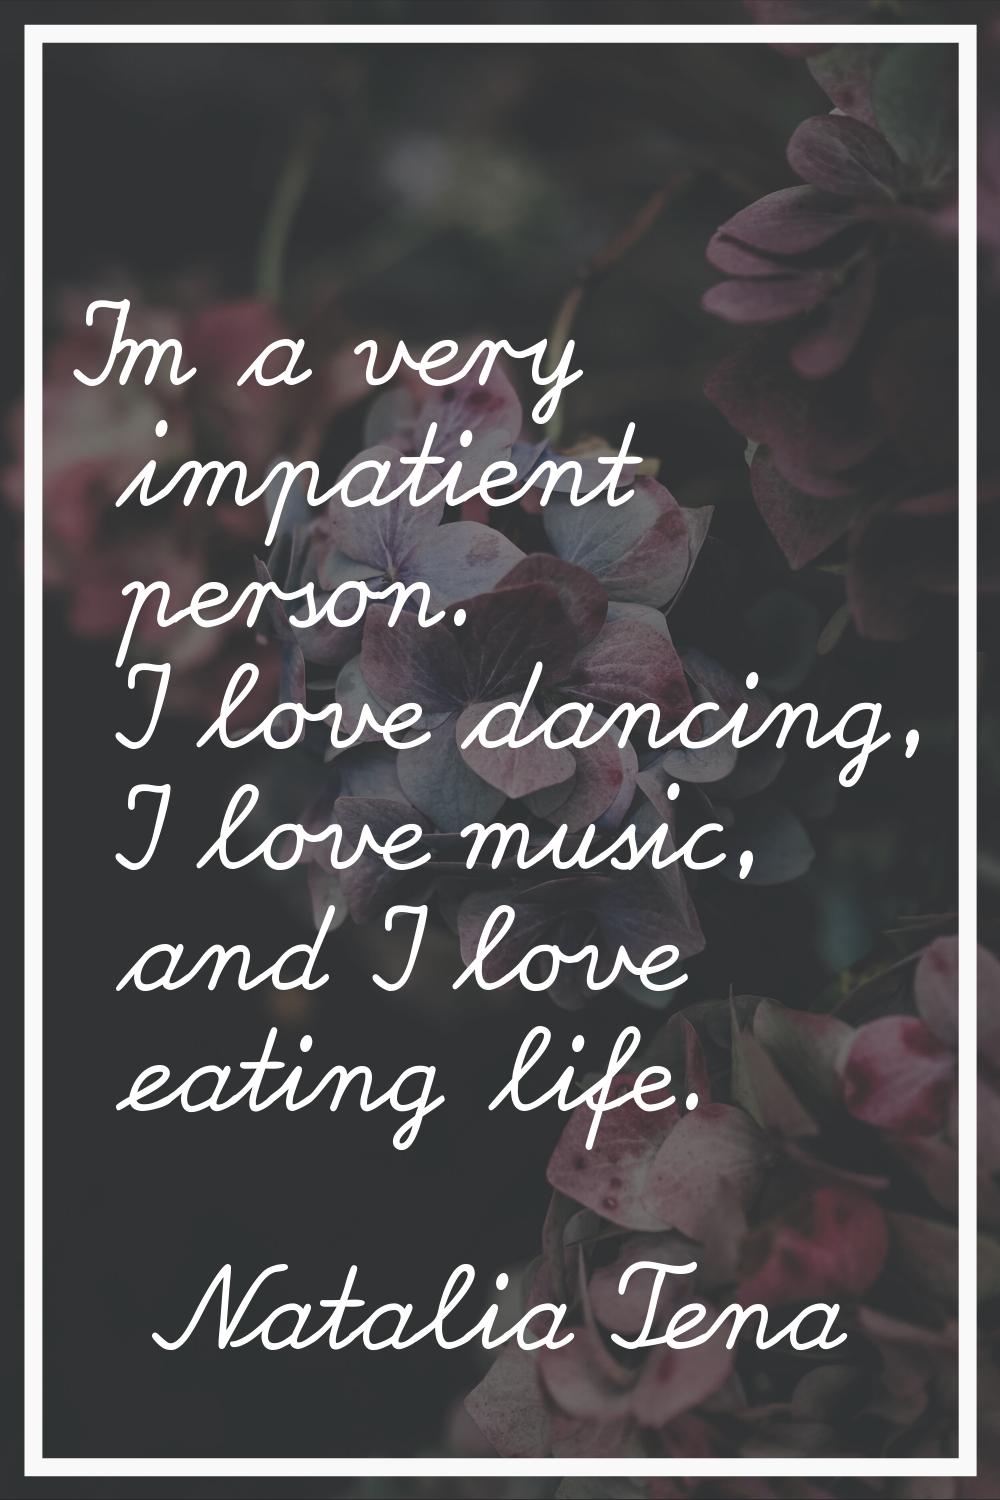 I'm a very impatient person. I love dancing, I love music, and I love eating life.